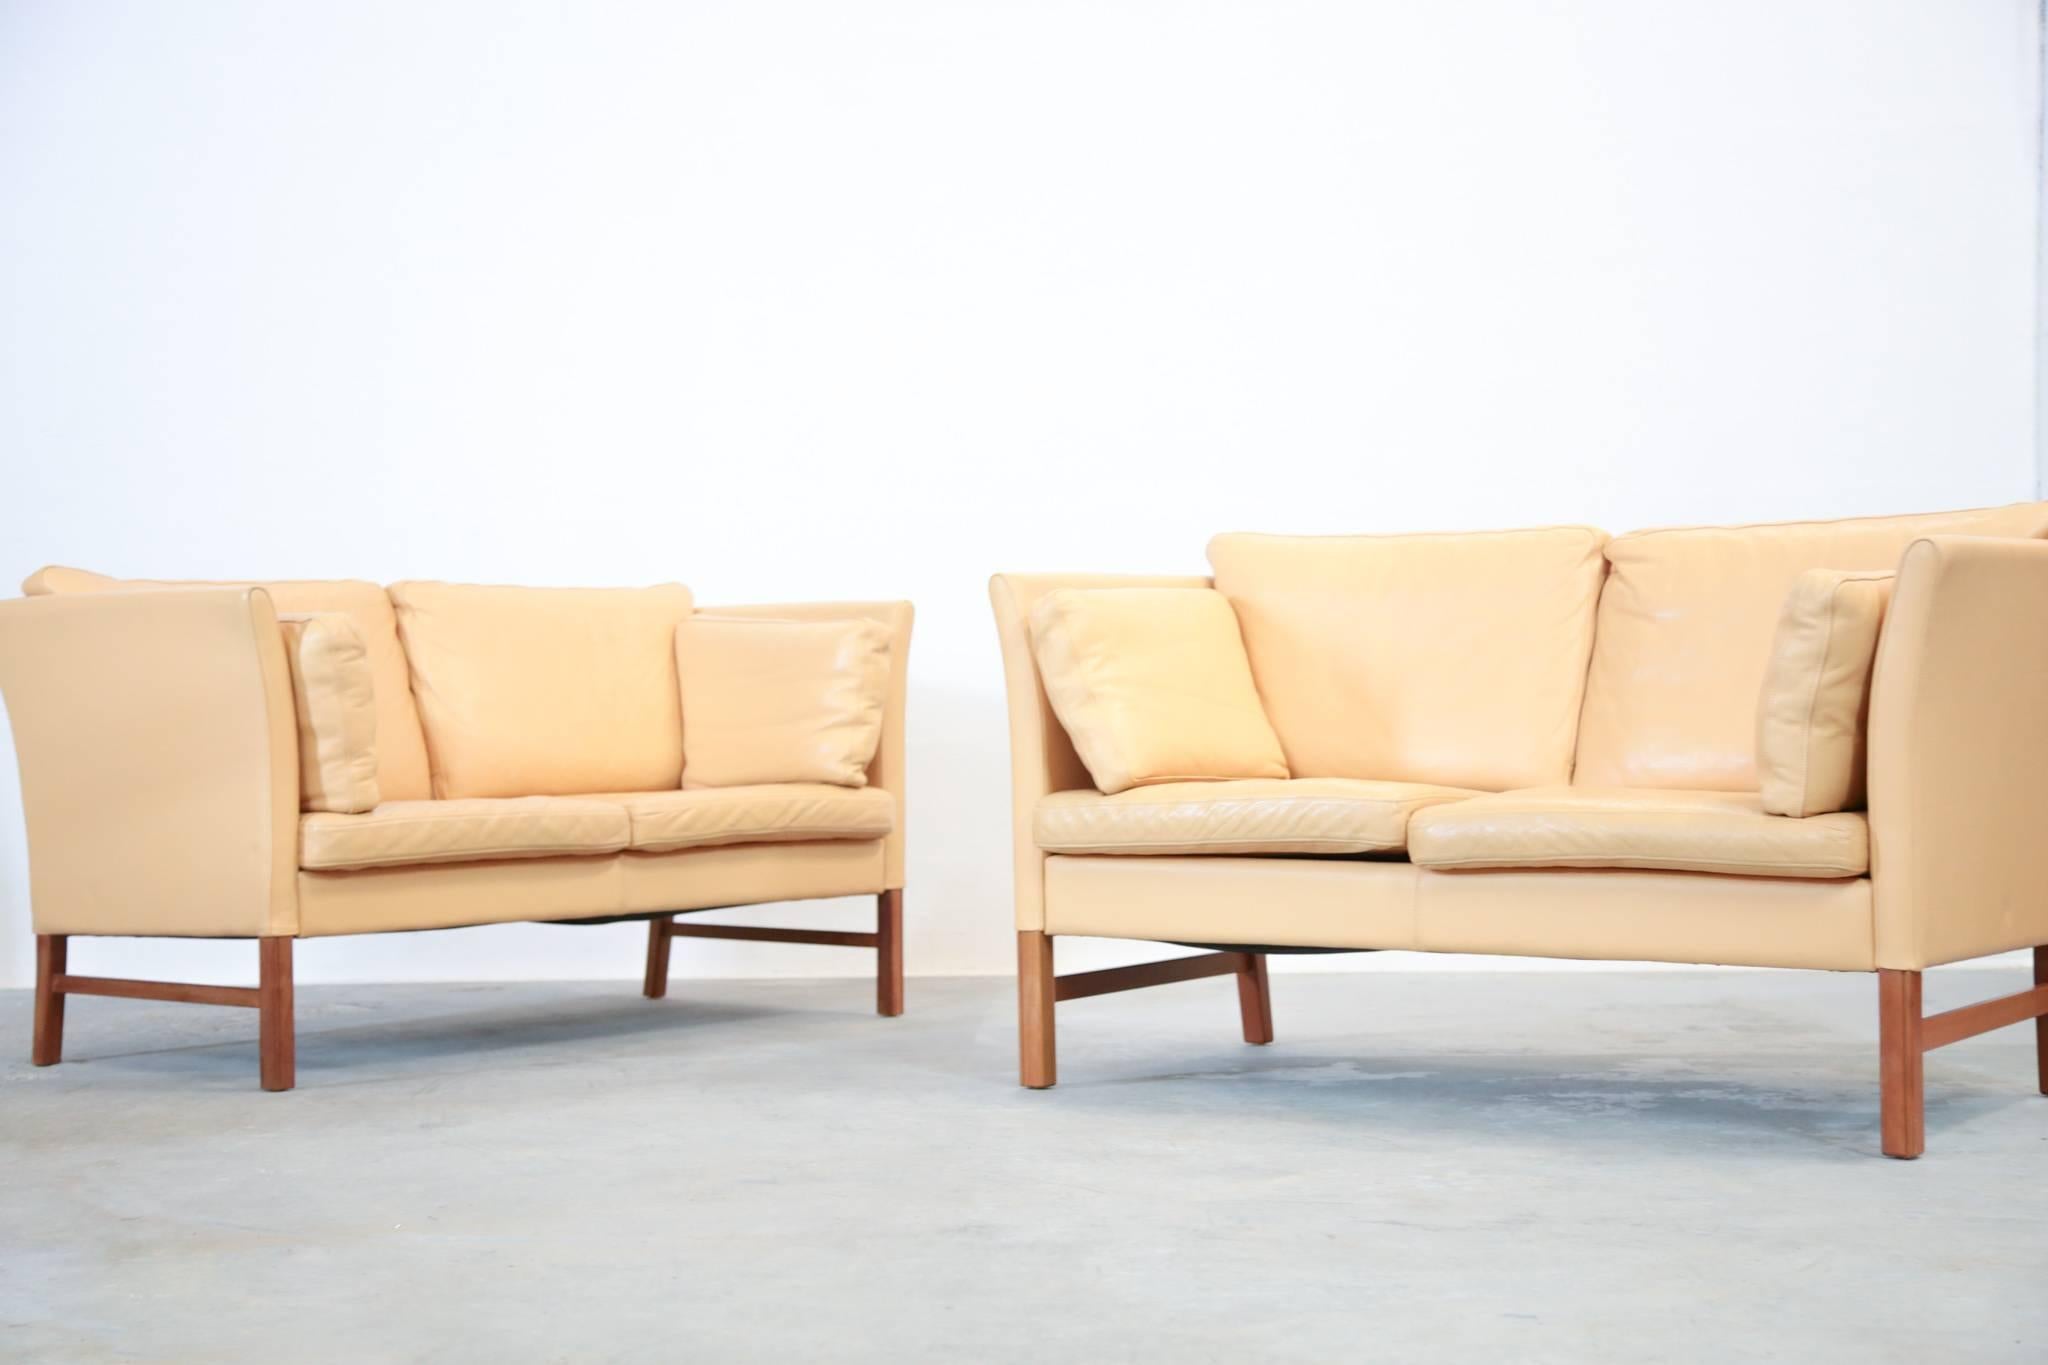 Two-seat sofa, leather and teak, Denmark, 1970s.
Scandinavian design, sturdy and elegant Danish sofa in excellent condition.